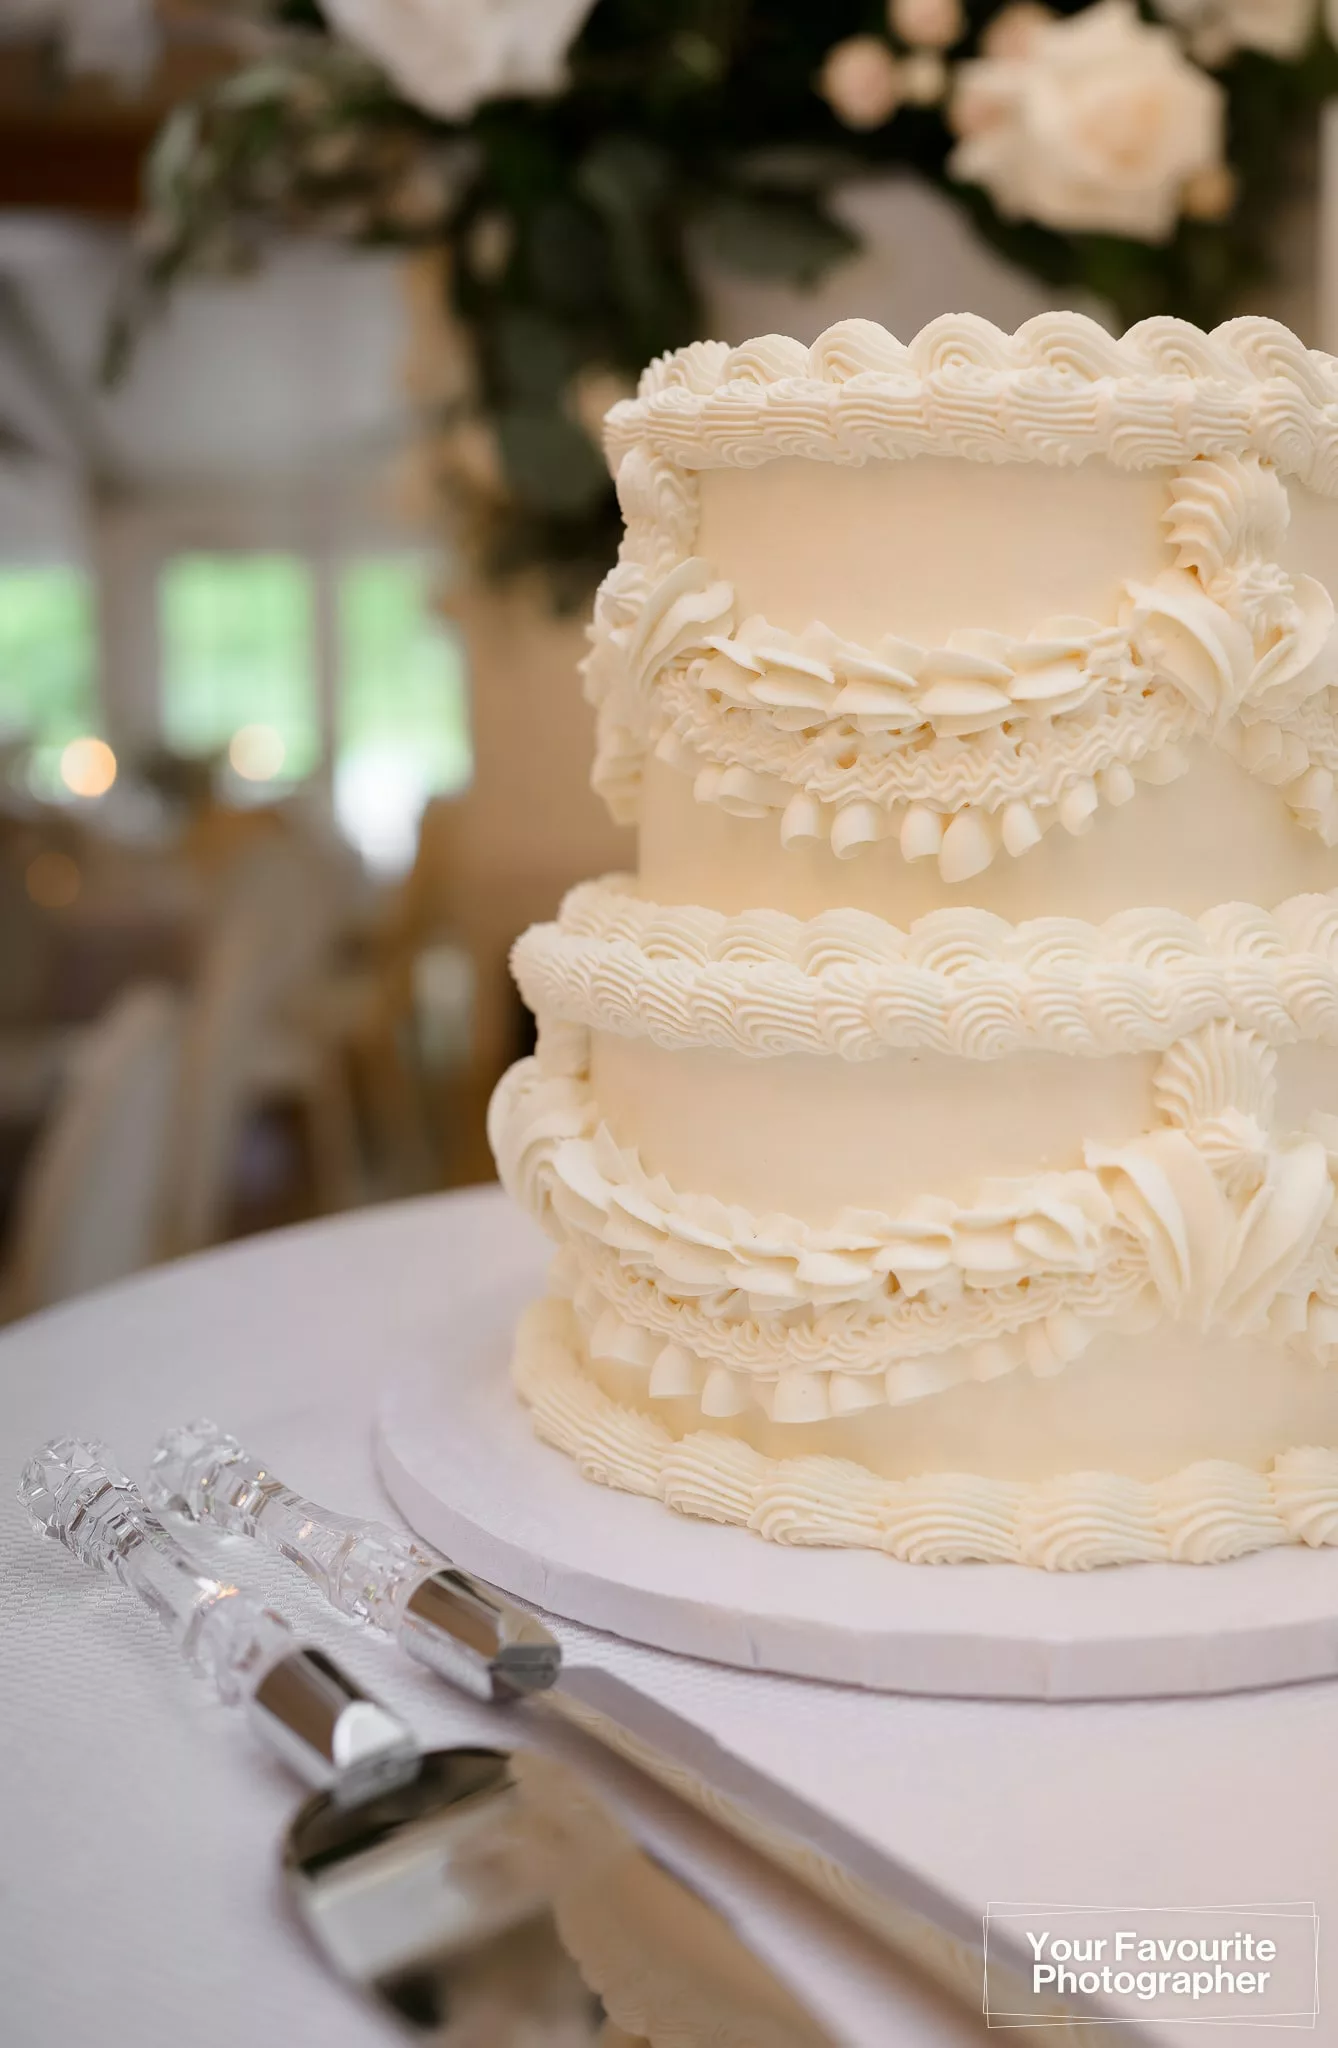 Close up of a simple, elegant white wedding cake with frosting